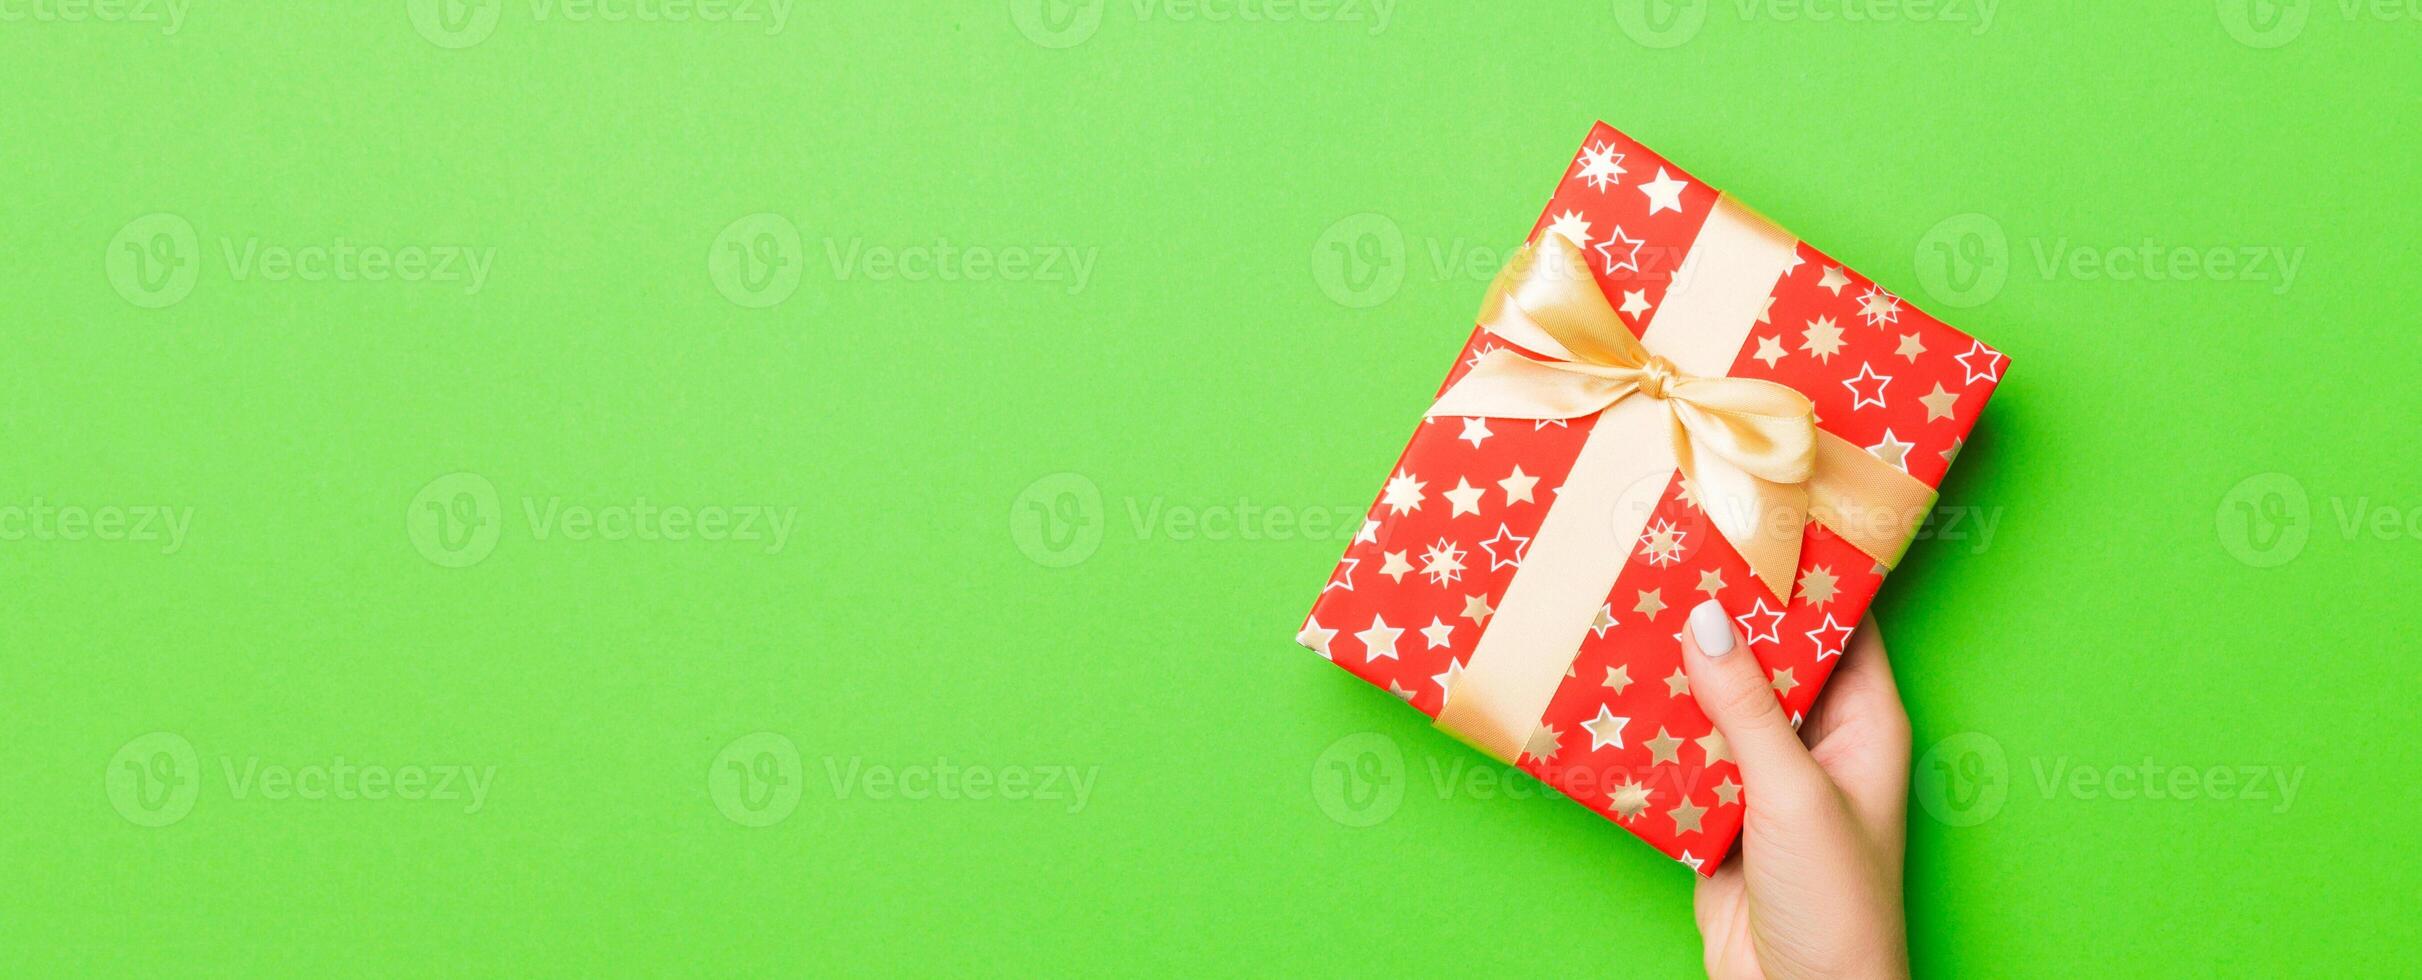 Top view of female hands holding christmas or other holiday handmade present box package in the palms, flat lay table background with copy space photo